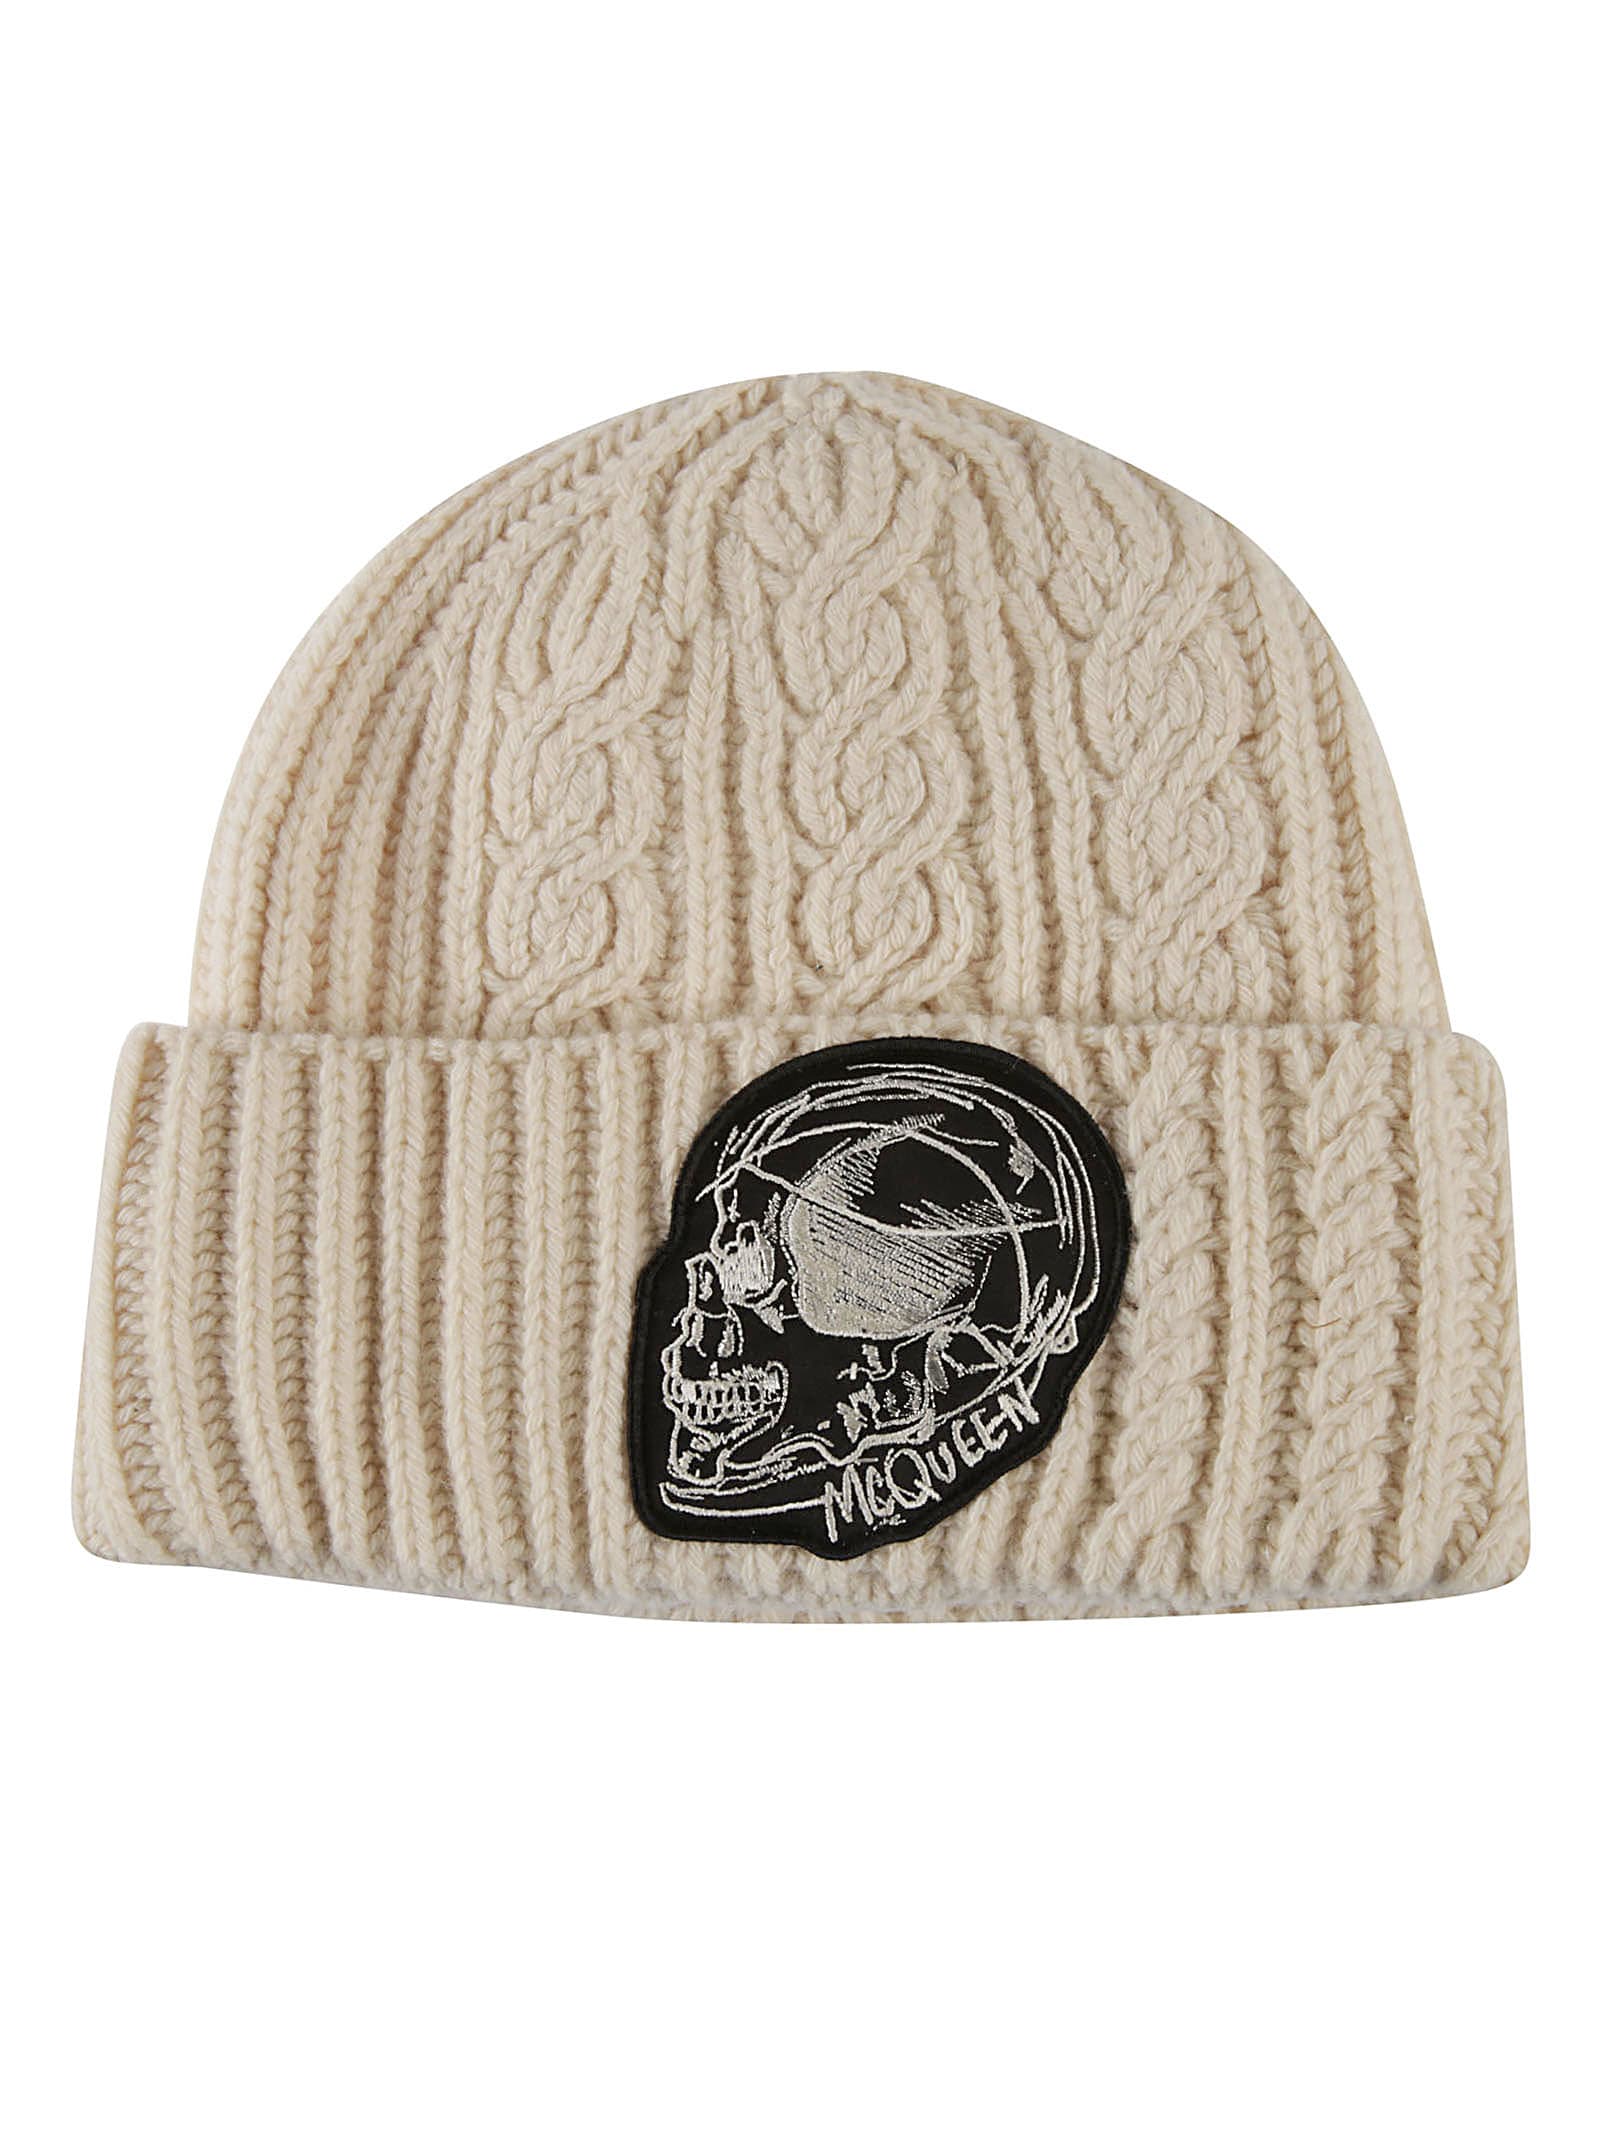 Alexander McQueen Painted Skull Cable Hat